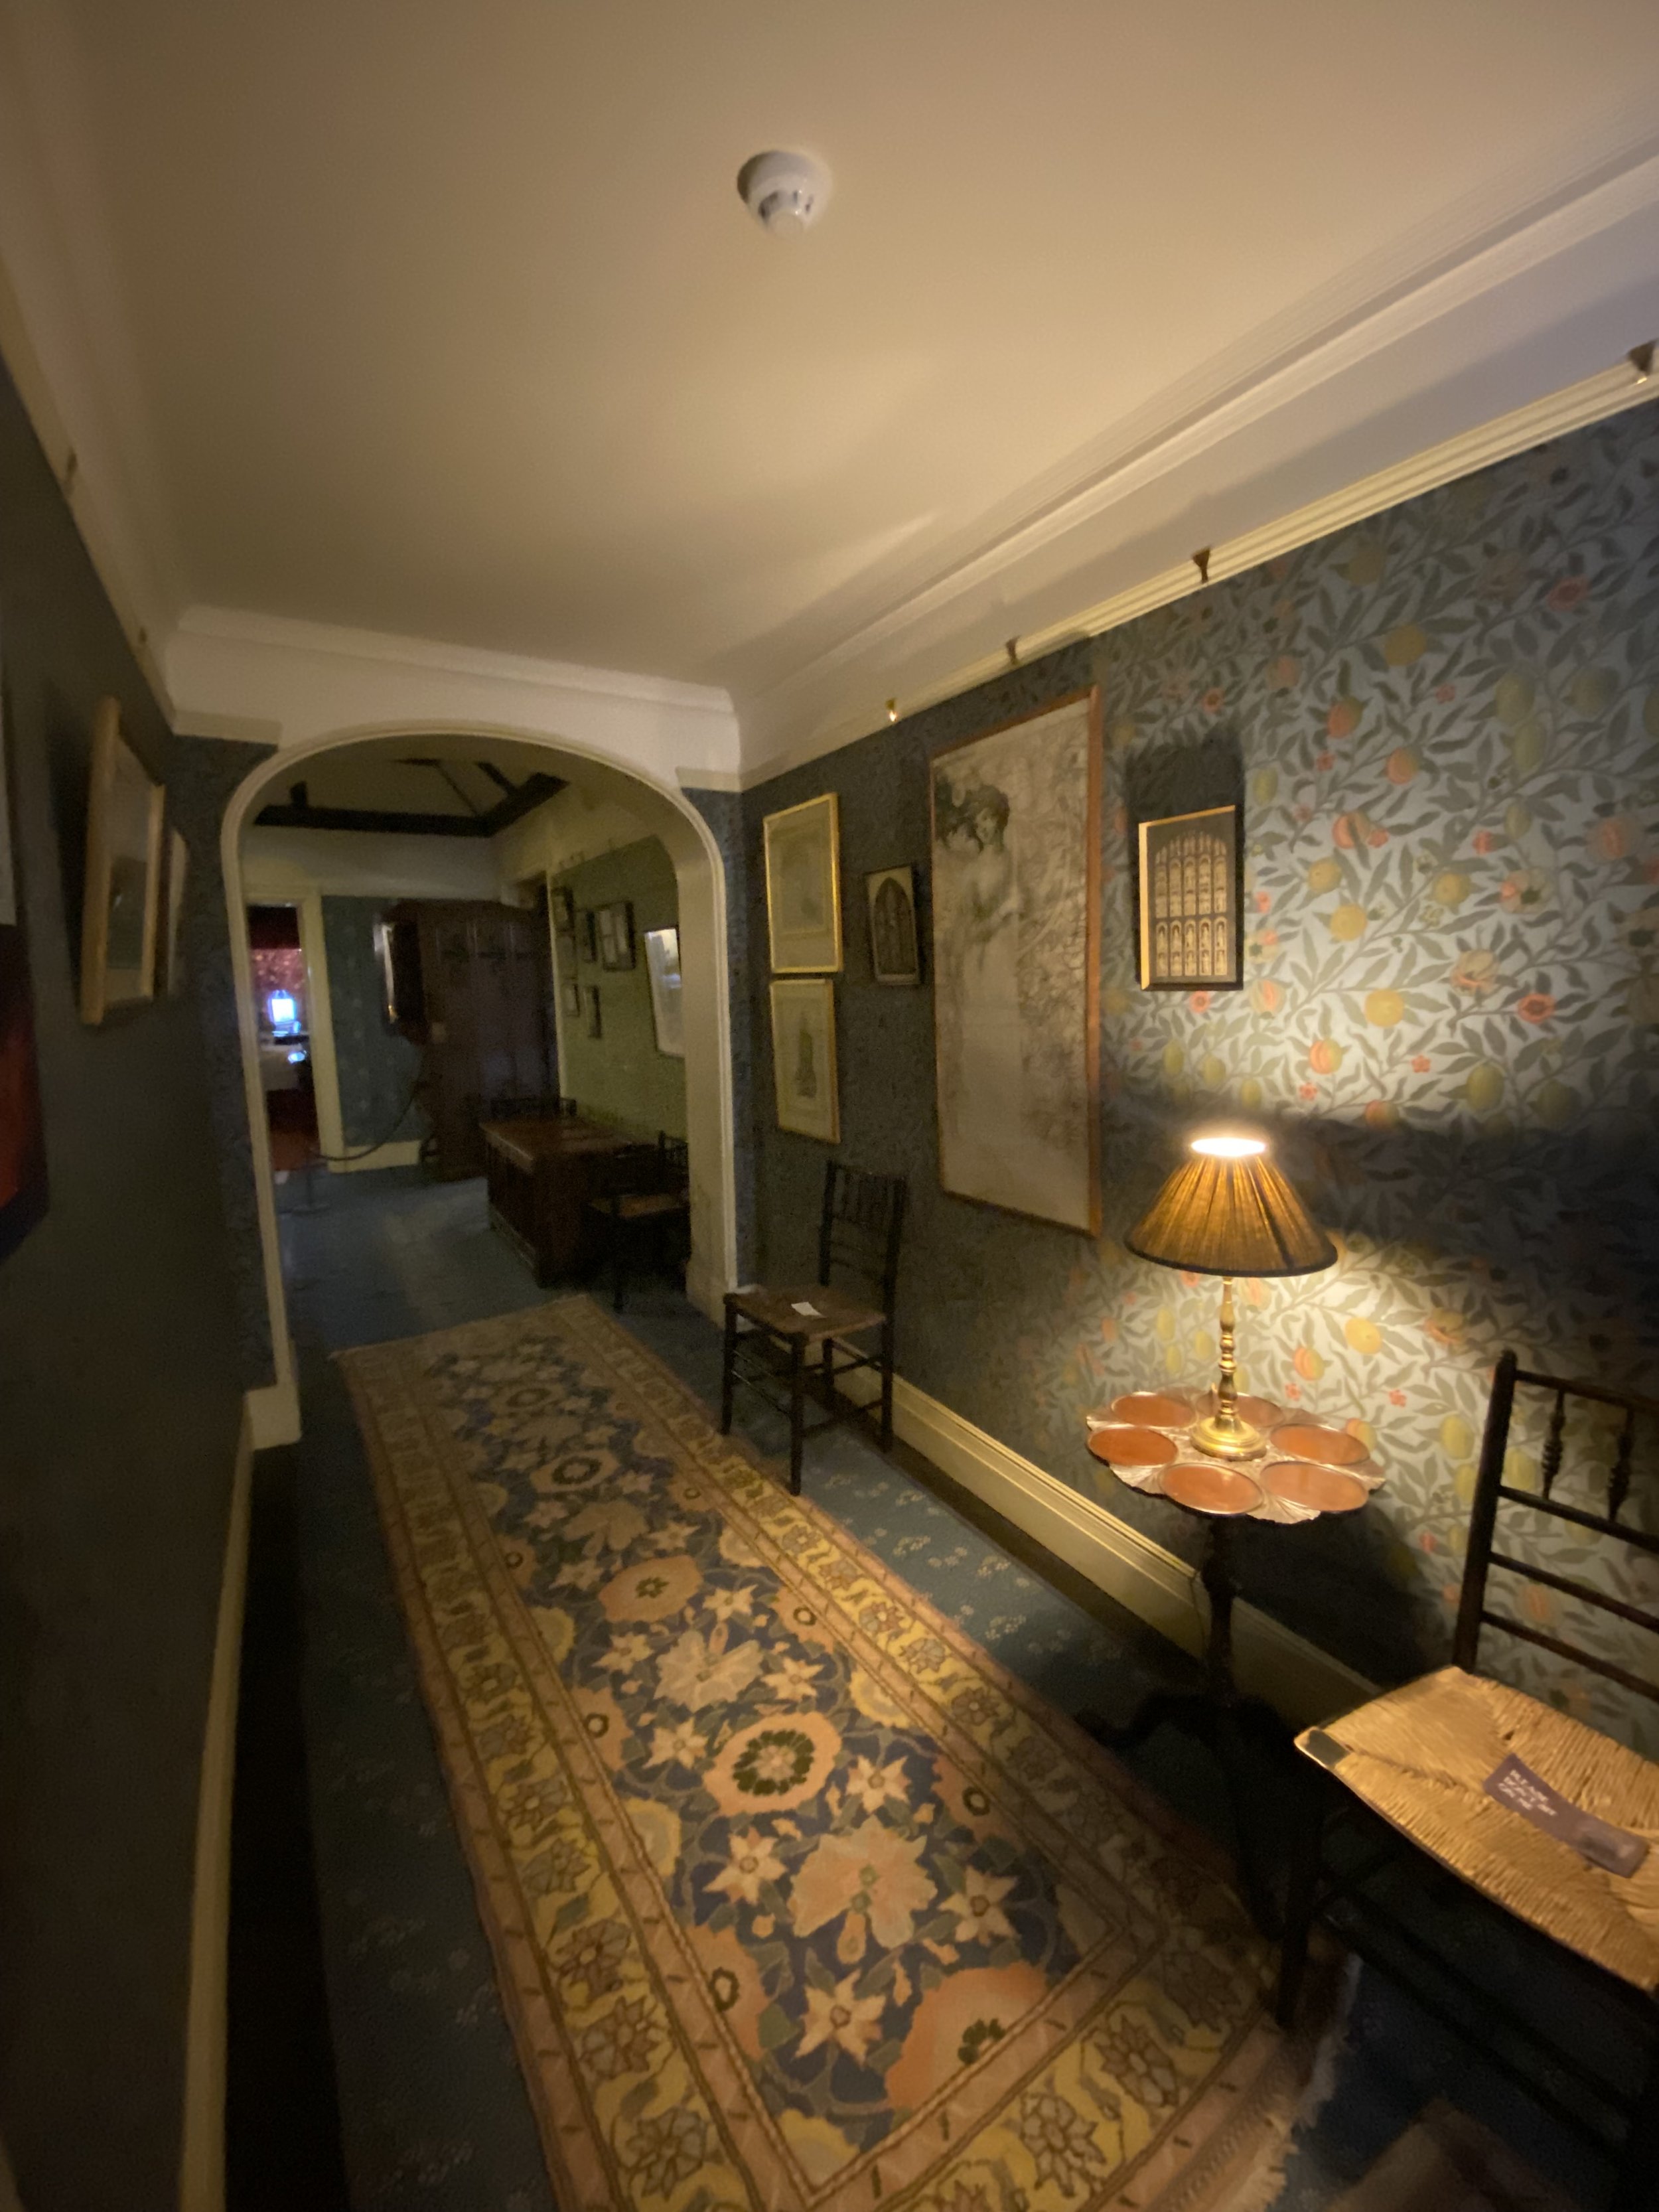  Interiors of Wightwick Manor, designed in the English Arts and Crafts style with many original fabrics and wallpapers by William Morris and his contemporaries. 